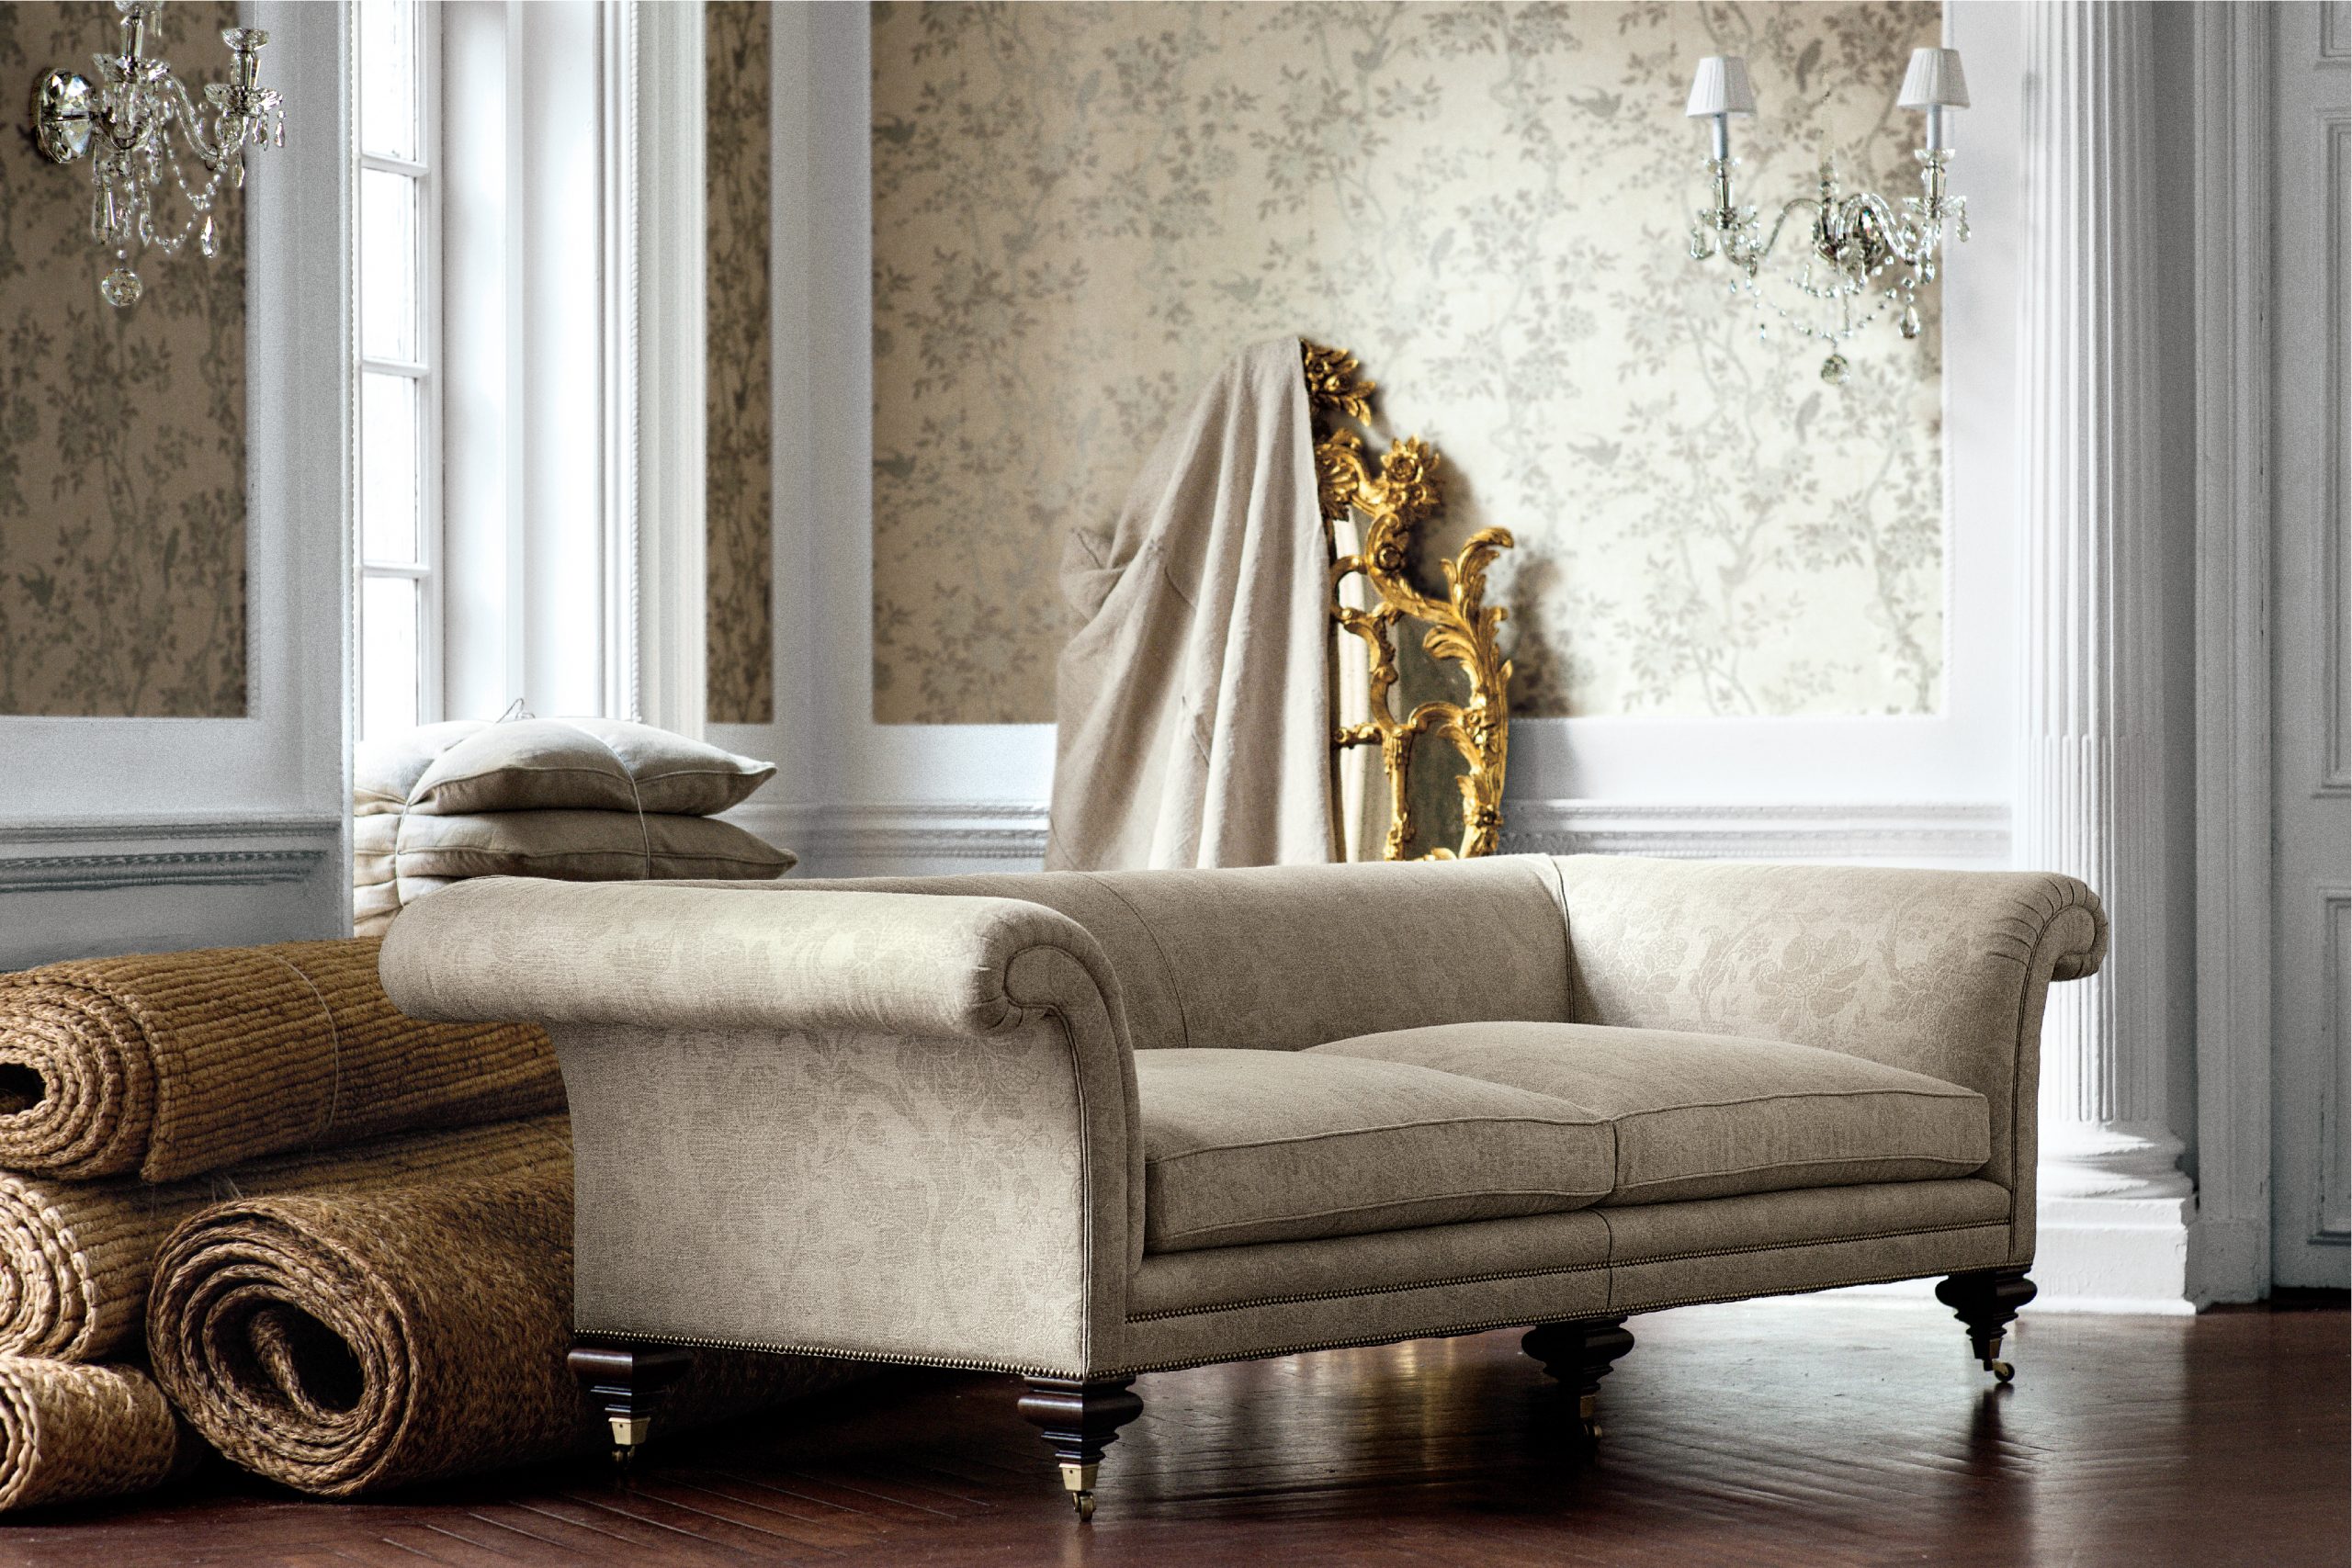 Glamorous home: Ralph Lauren Home - Apartment No. One Collection